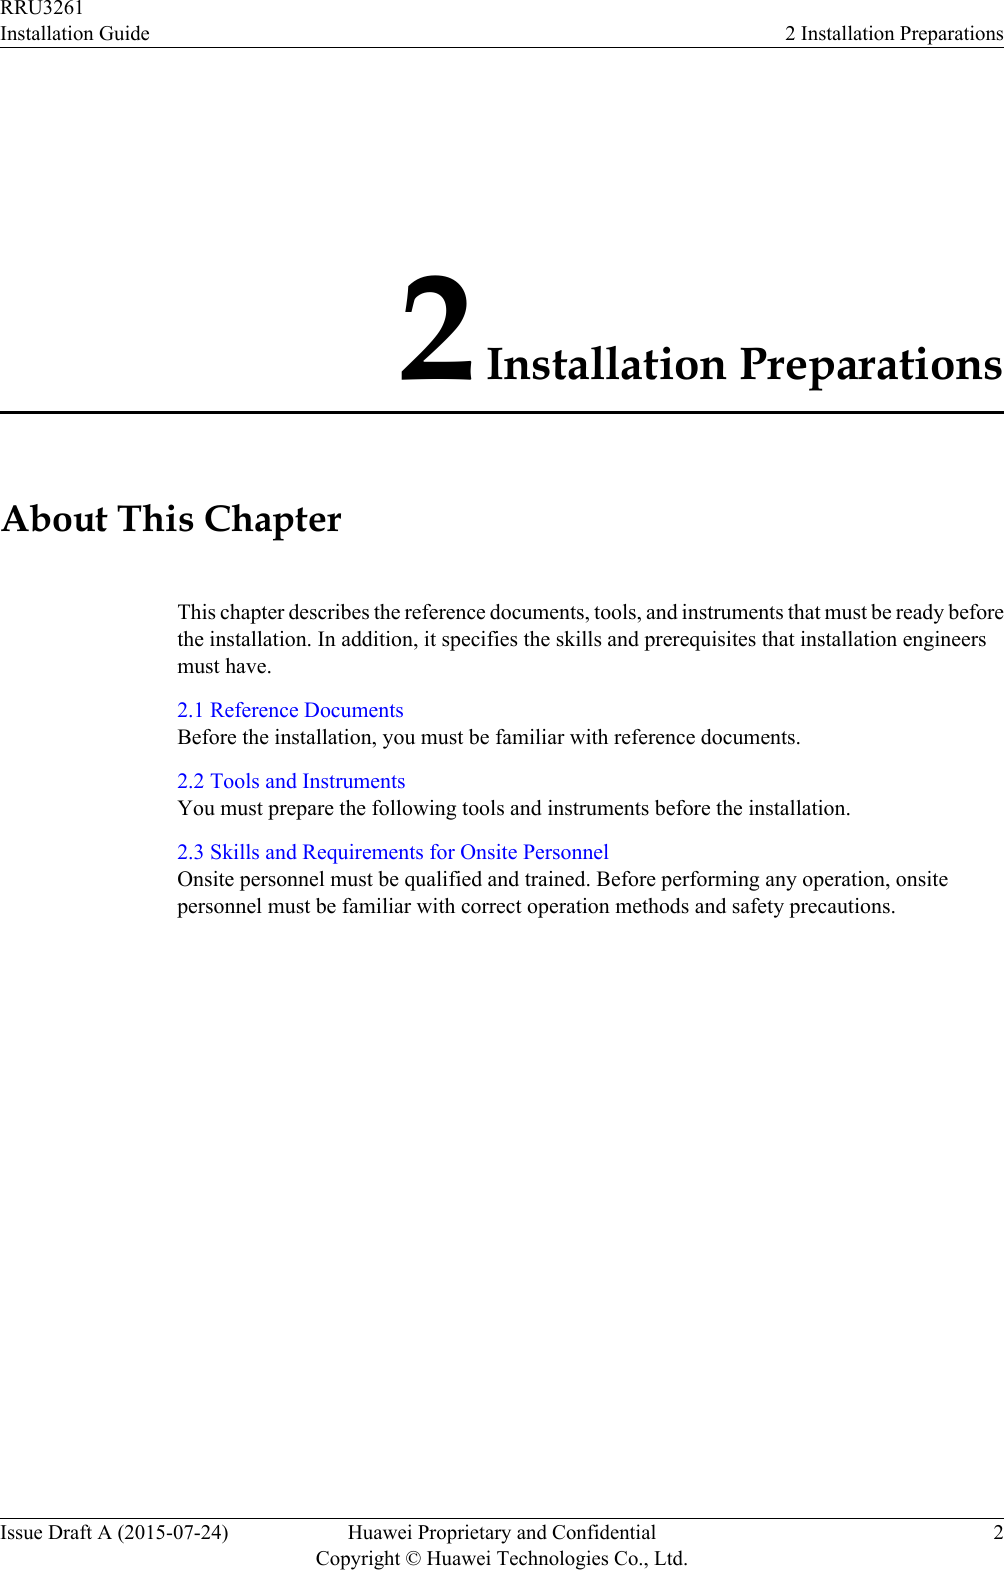 2 Installation PreparationsAbout This ChapterThis chapter describes the reference documents, tools, and instruments that must be ready beforethe installation. In addition, it specifies the skills and prerequisites that installation engineersmust have.2.1 Reference DocumentsBefore the installation, you must be familiar with reference documents.2.2 Tools and InstrumentsYou must prepare the following tools and instruments before the installation.2.3 Skills and Requirements for Onsite PersonnelOnsite personnel must be qualified and trained. Before performing any operation, onsitepersonnel must be familiar with correct operation methods and safety precautions.RRU3261Installation Guide 2 Installation PreparationsIssue Draft A (2015-07-24) Huawei Proprietary and ConfidentialCopyright © Huawei Technologies Co., Ltd.2